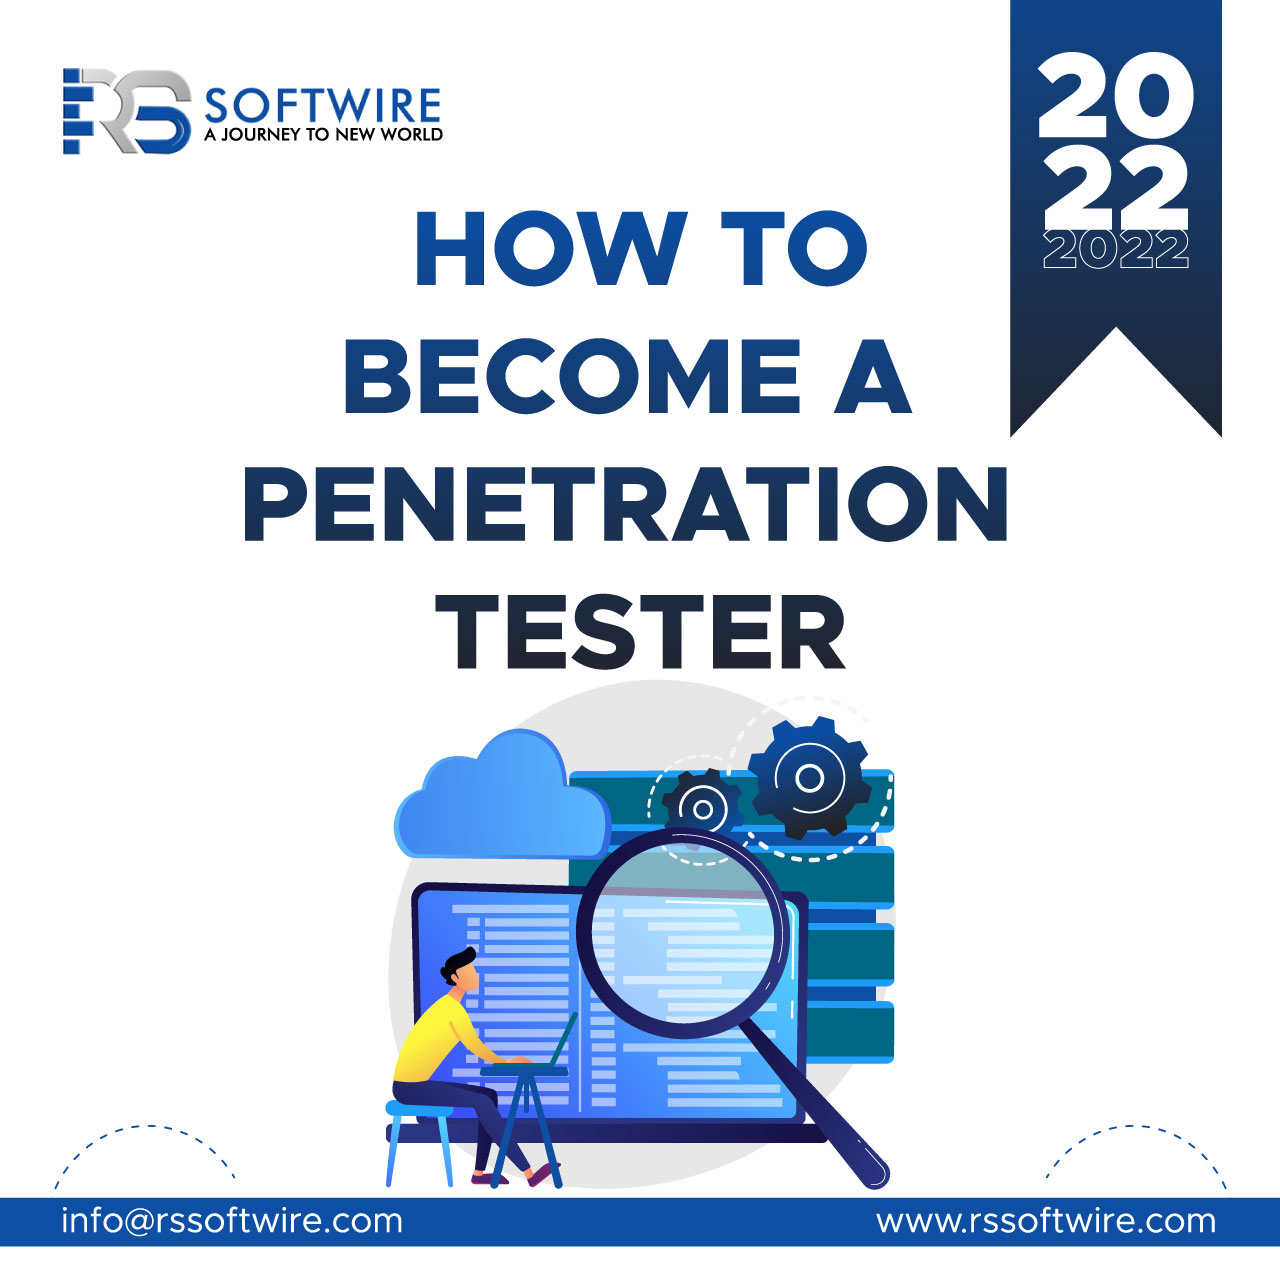 How to Become a Penetration Tester